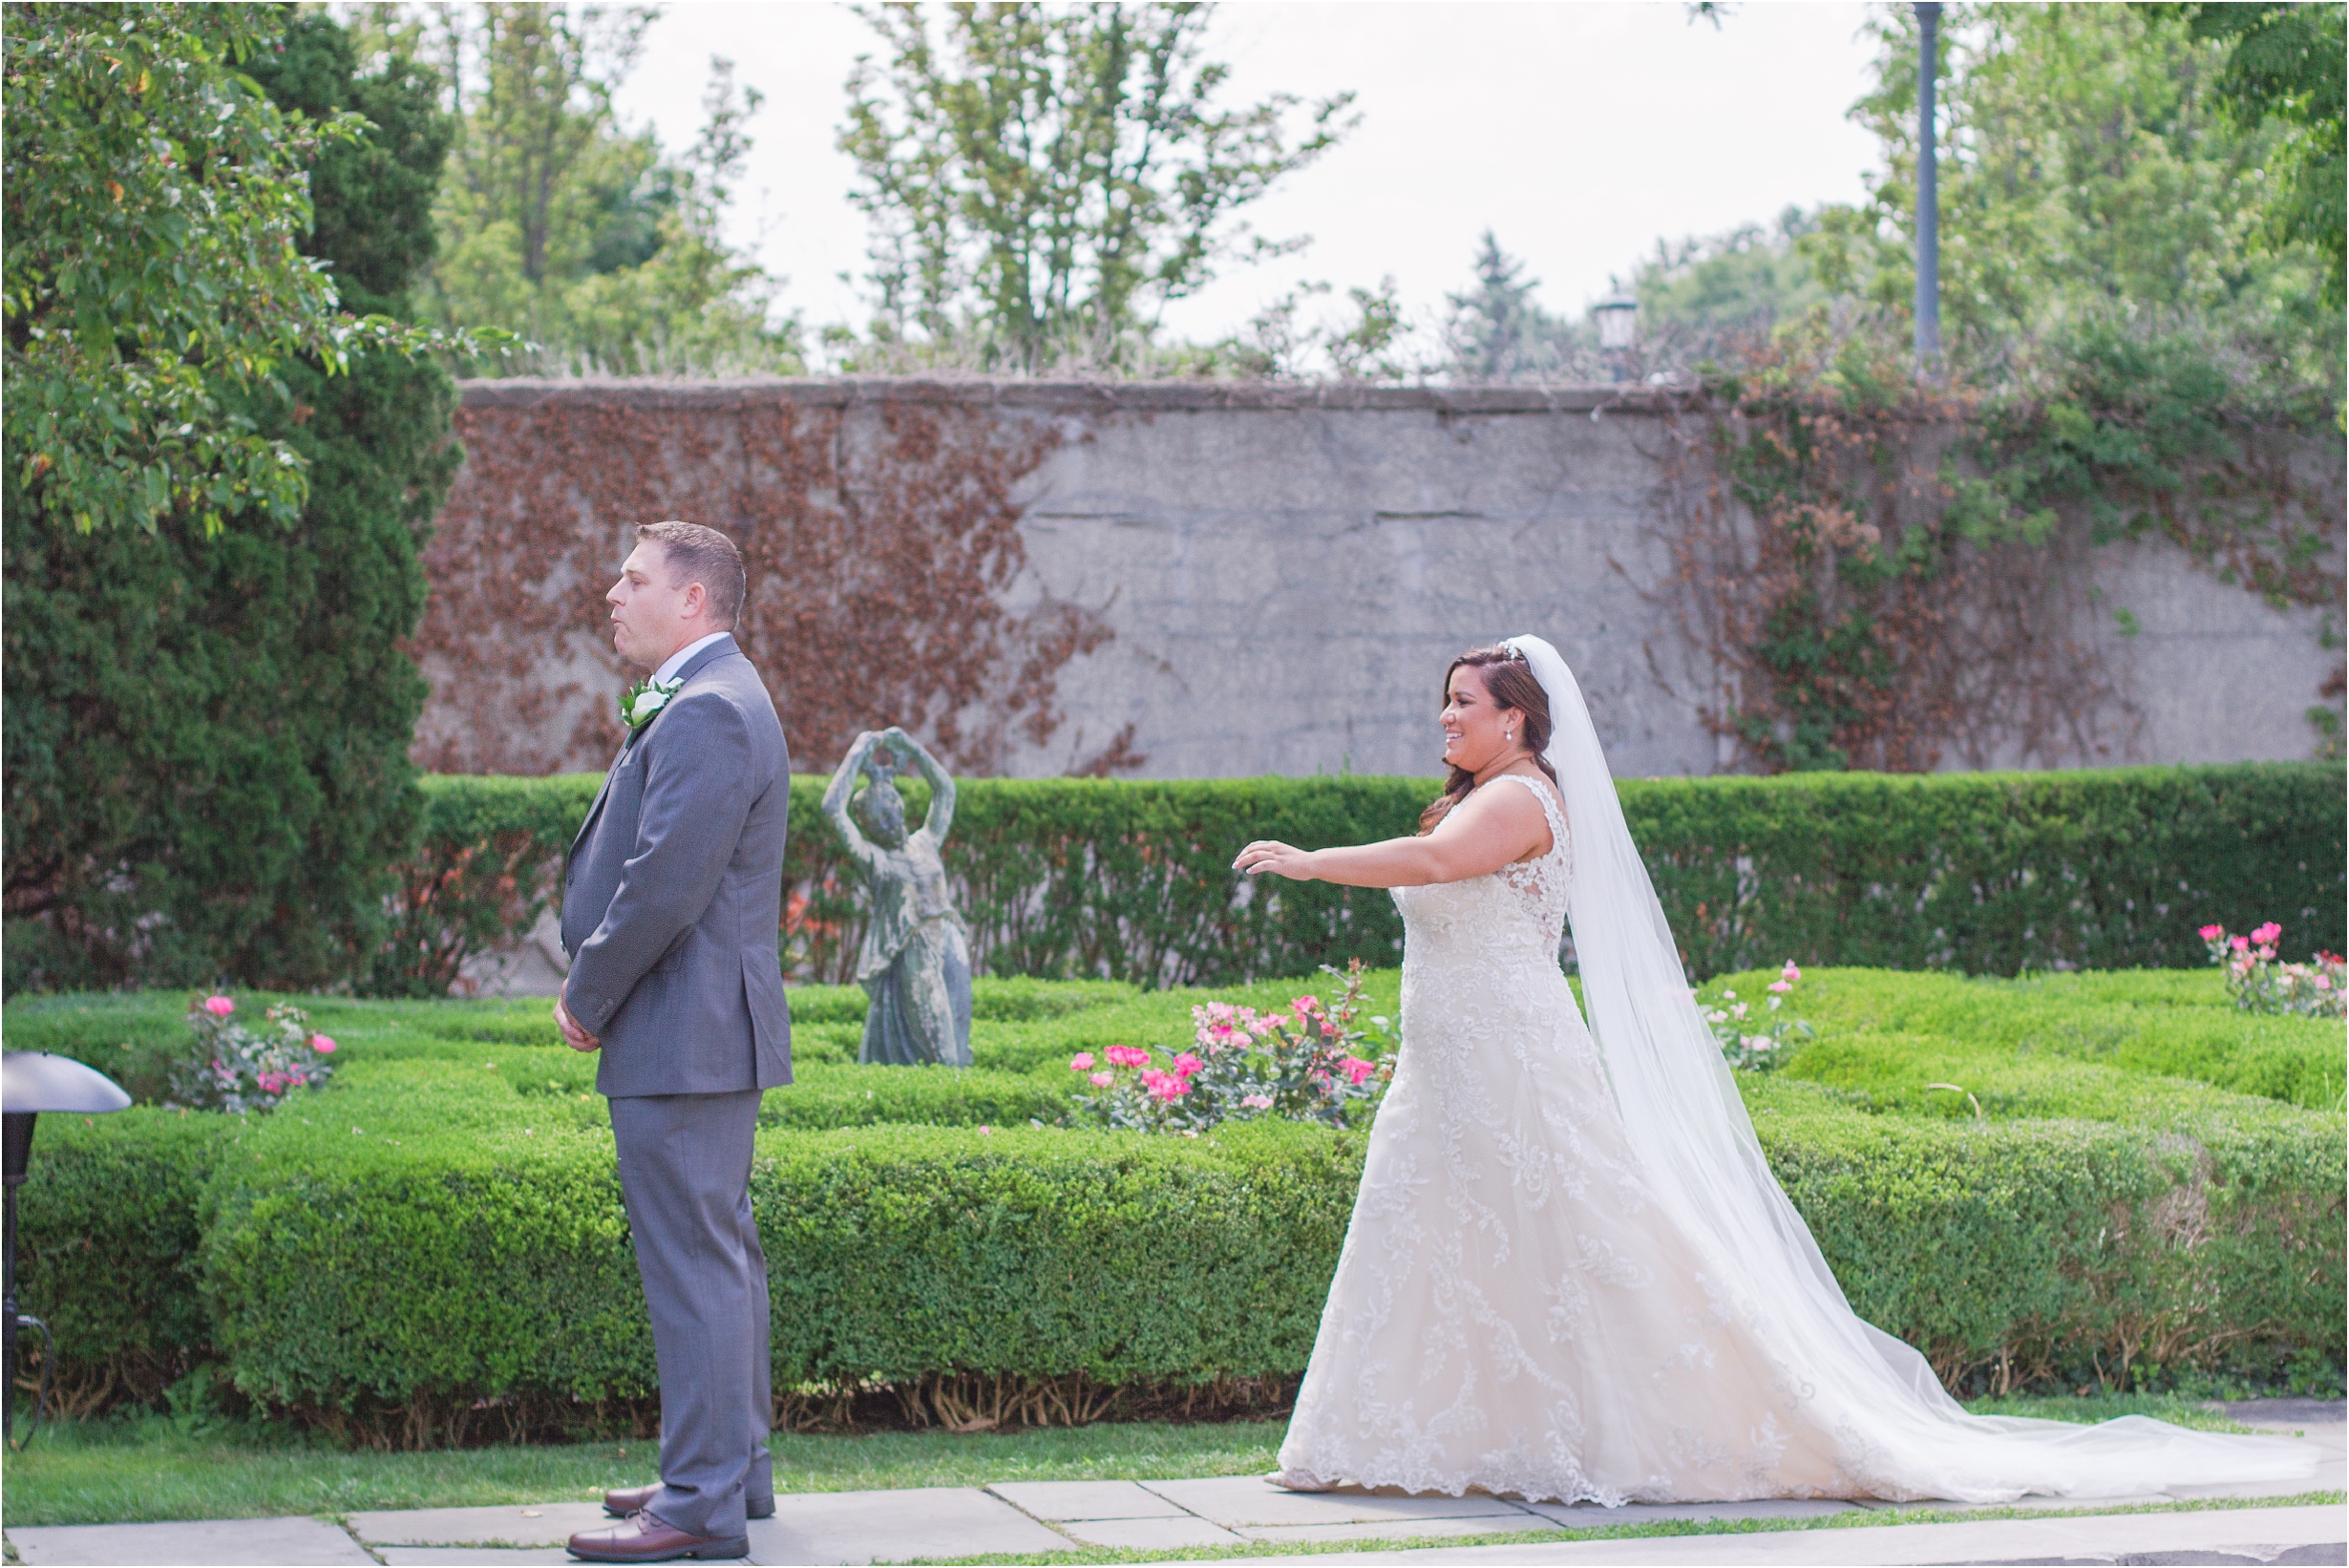 romantic-timeless-candid-wedding-photos-at-the-war-memorial-in-grosse-pointe-mi-by-courtney-carolyn-photography_0003.jpg